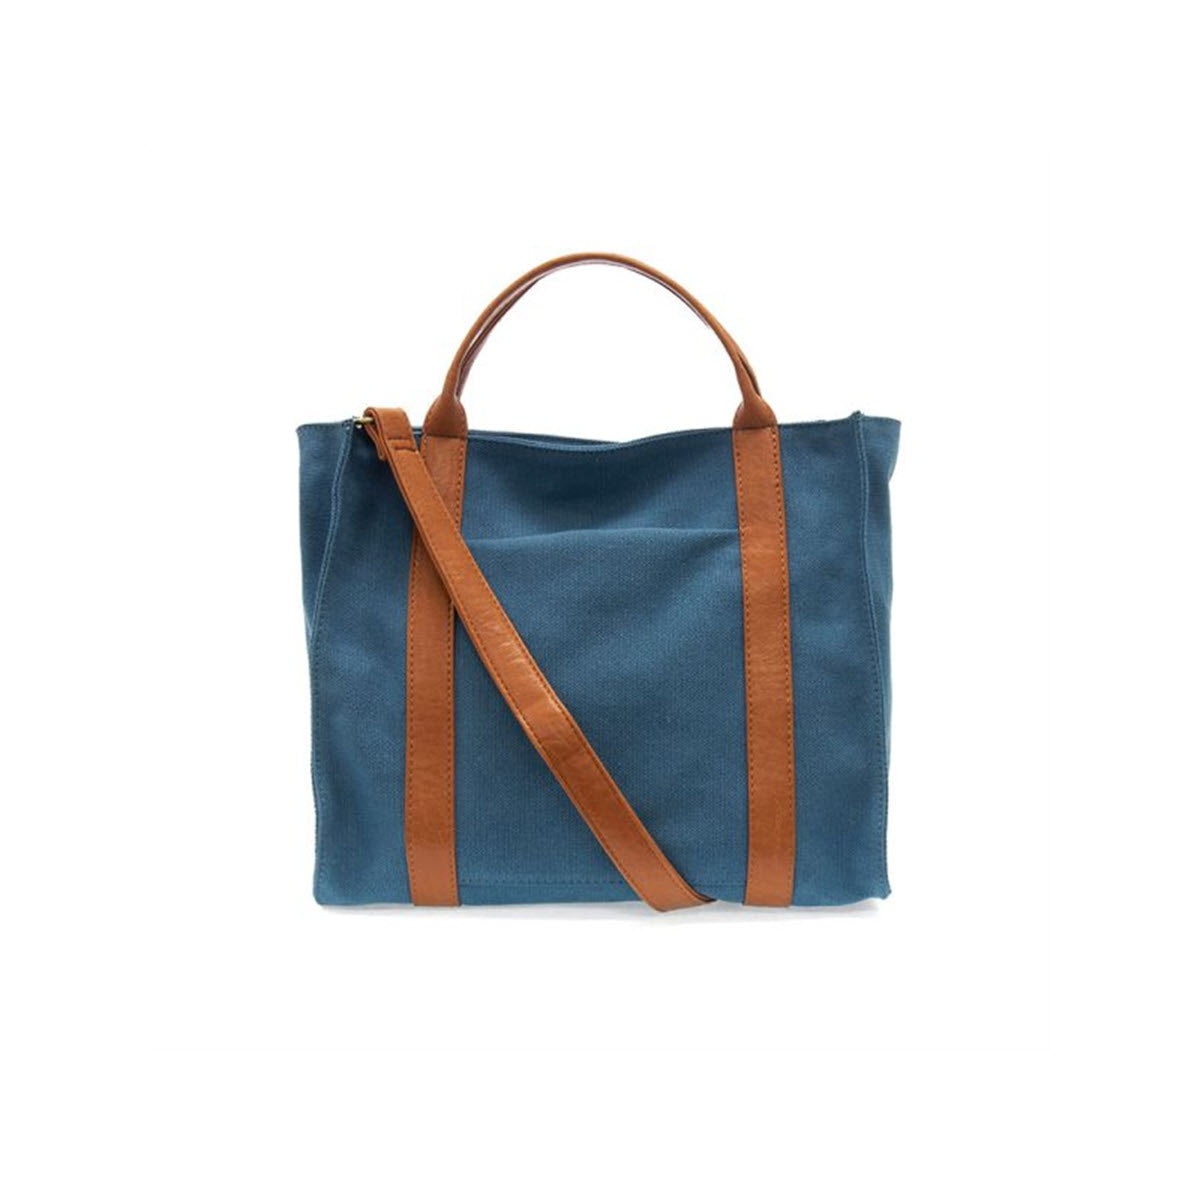 JOY SUSAN TONI LARGE CANVAS TOTE COASTAL made of buffalo vegan leather with removable shoulder strap, isolated on a white background.